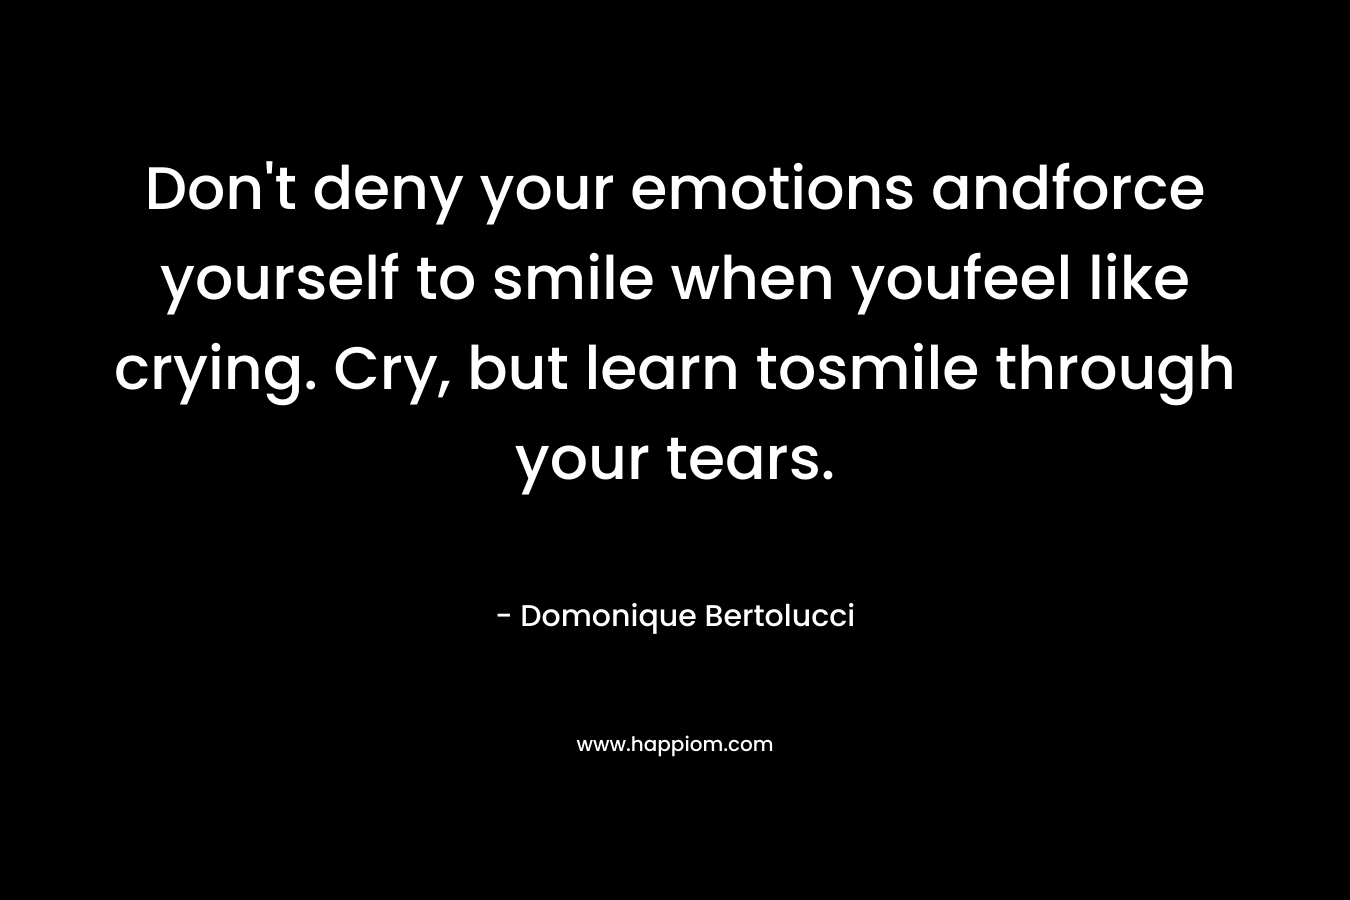 Don't deny your emotions andforce yourself to smile when youfeel like crying. Cry, but learn tosmile through your tears.